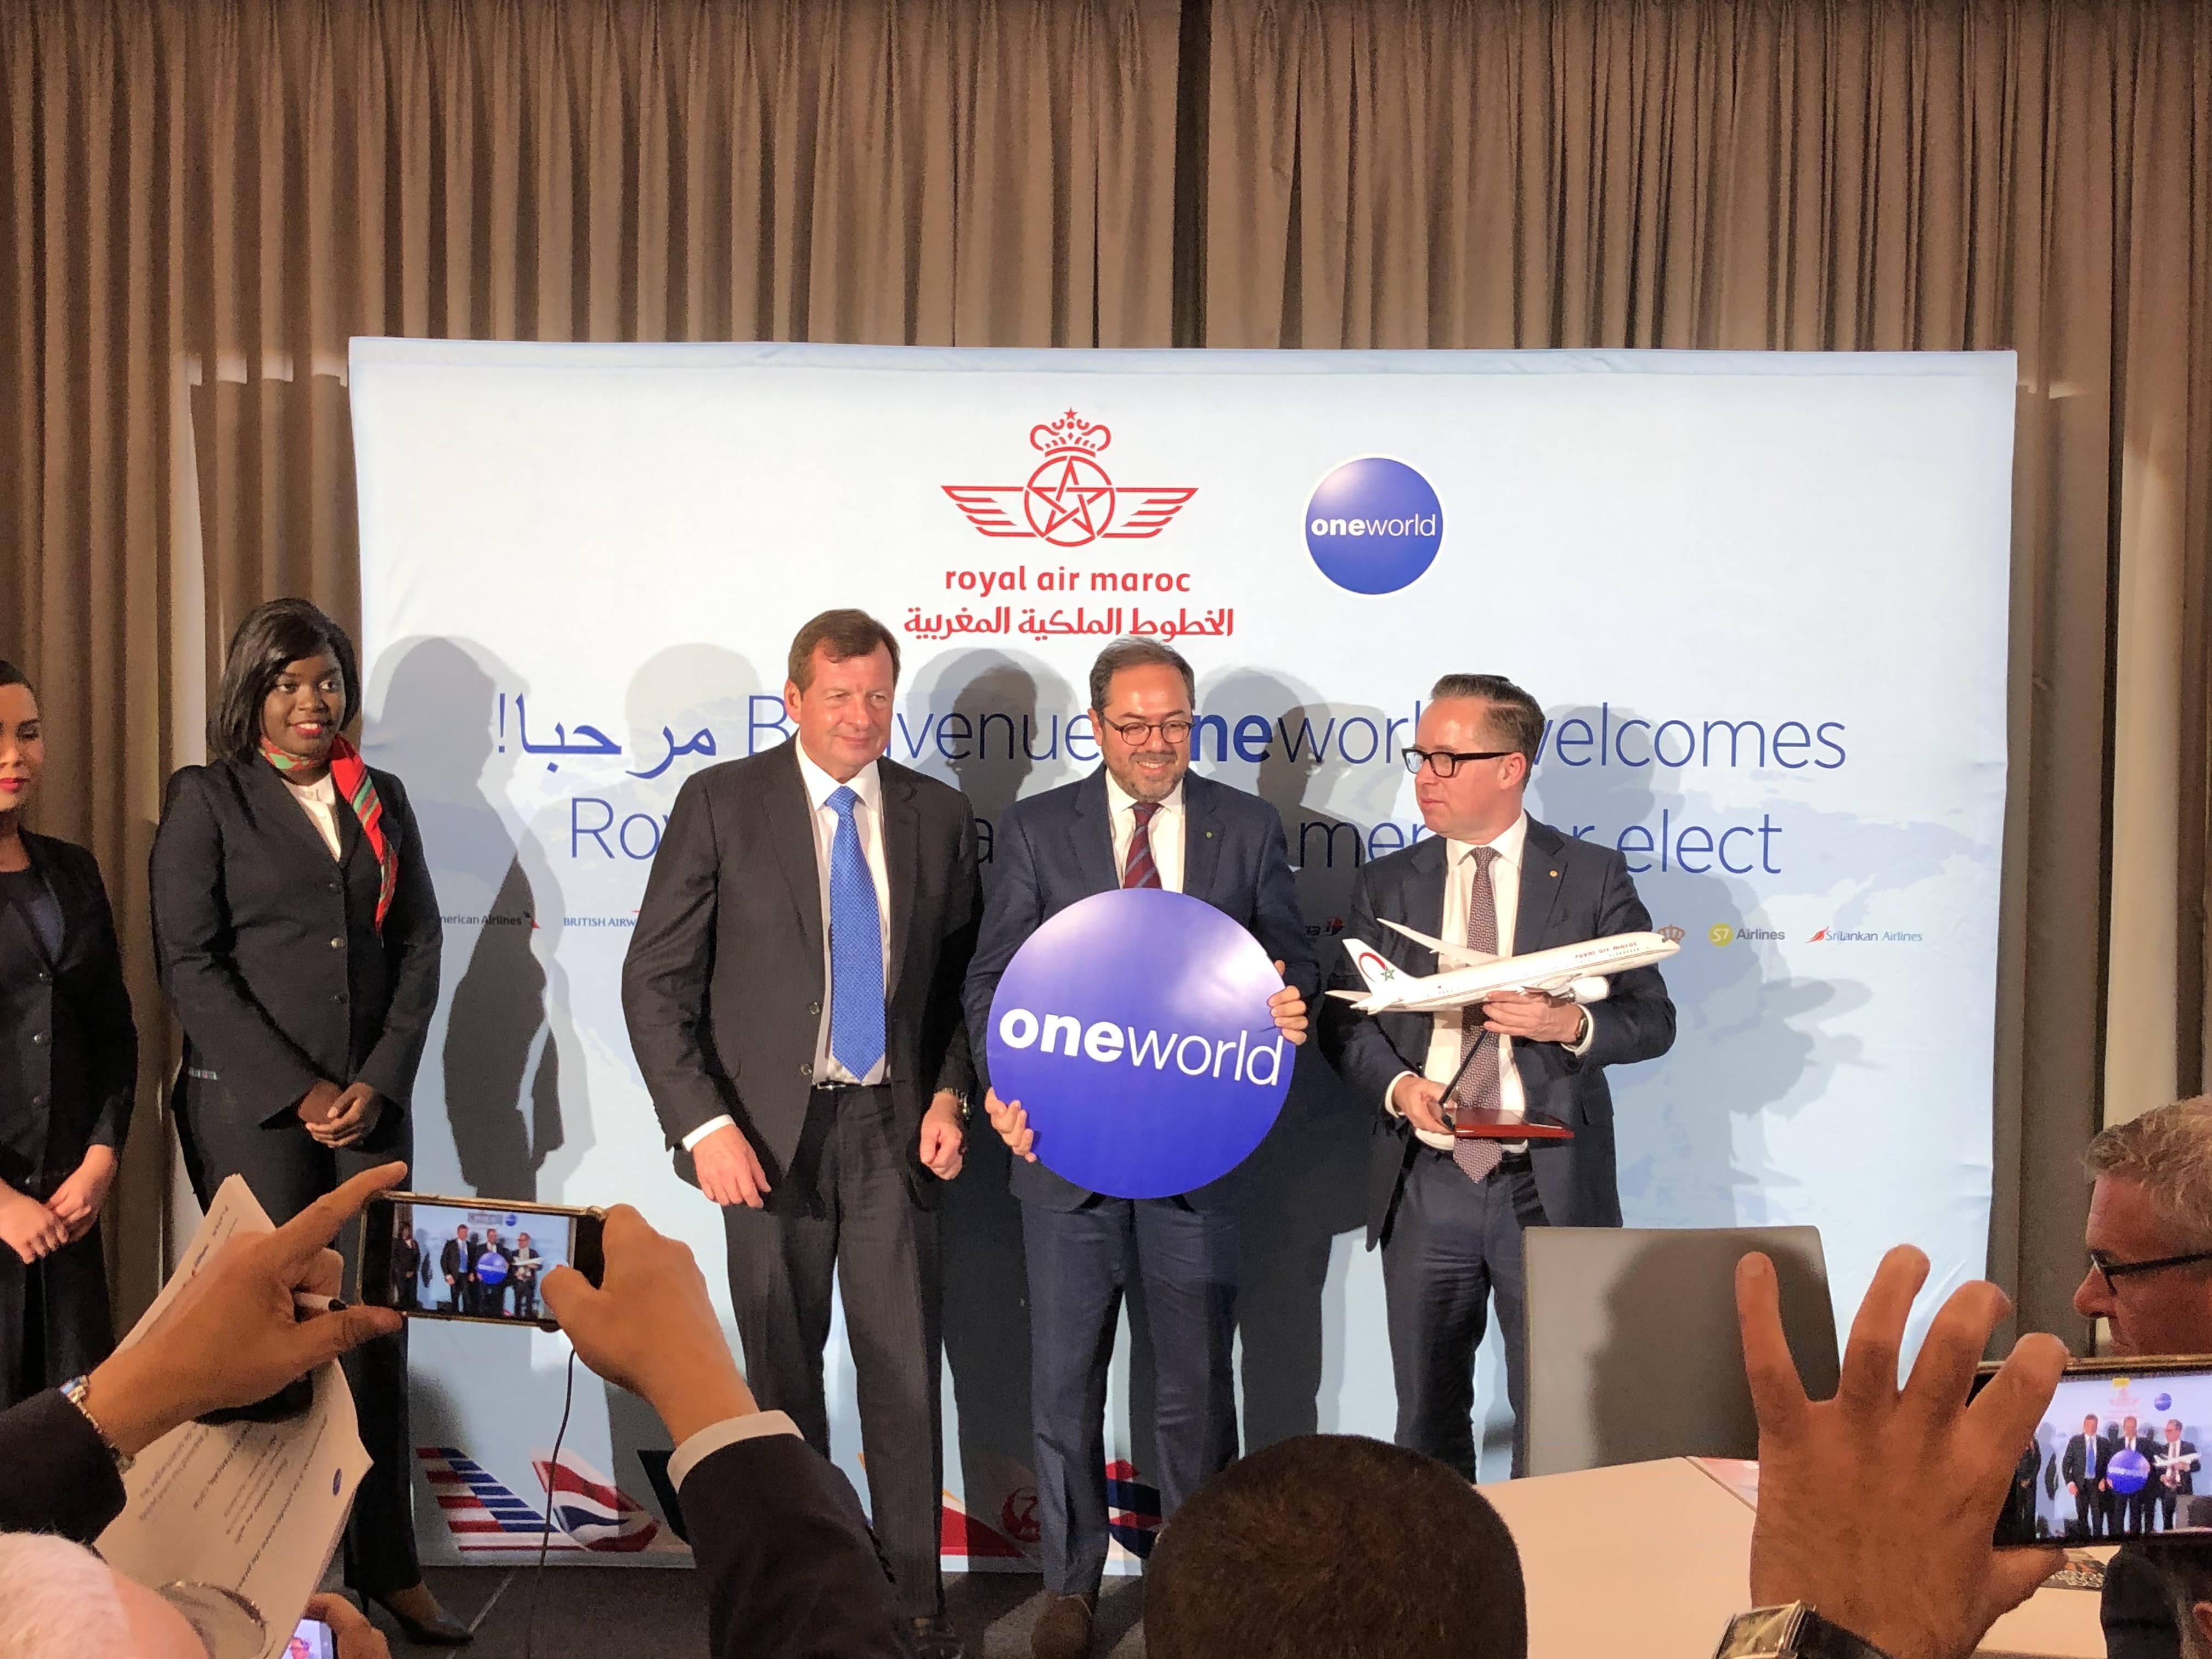 Oneworld CEO Rob Gurney (left), with Royal Air Maroc CEO Abdelhamid Addou (centre), and Qantas CEO Alan Joyce (right) in New York last week, announcing the Moroccan airline RAM as the newest member of the alliance. Photo: Danny Lee